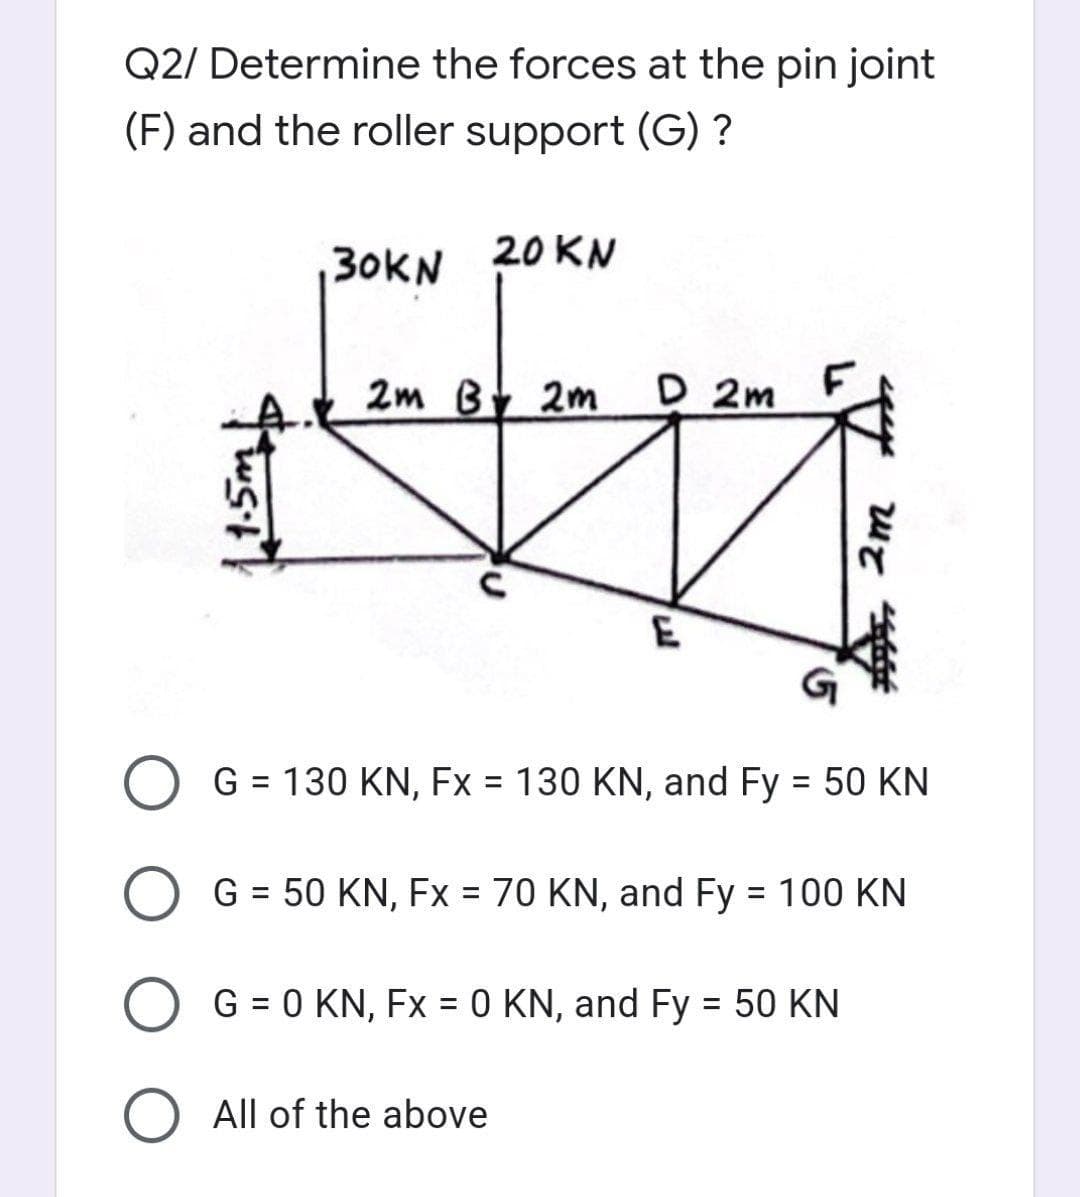 Q2/ Determine the forces at the pin joint
(F) and the roller support (G) ?
30KN
20 KN
2m By 2m
D 2m
E
G = 130 KN, Fx = 130 KN, and Fy = 50 KN
%3D
%3D
G = 50 KN, Fx = 70 KN, and Fy = 100 KN
%3D
%3D
%3D
O G = 0 KN, Fx = 0 KN, and Fy 50 KN
%3D
All of the above
2m
